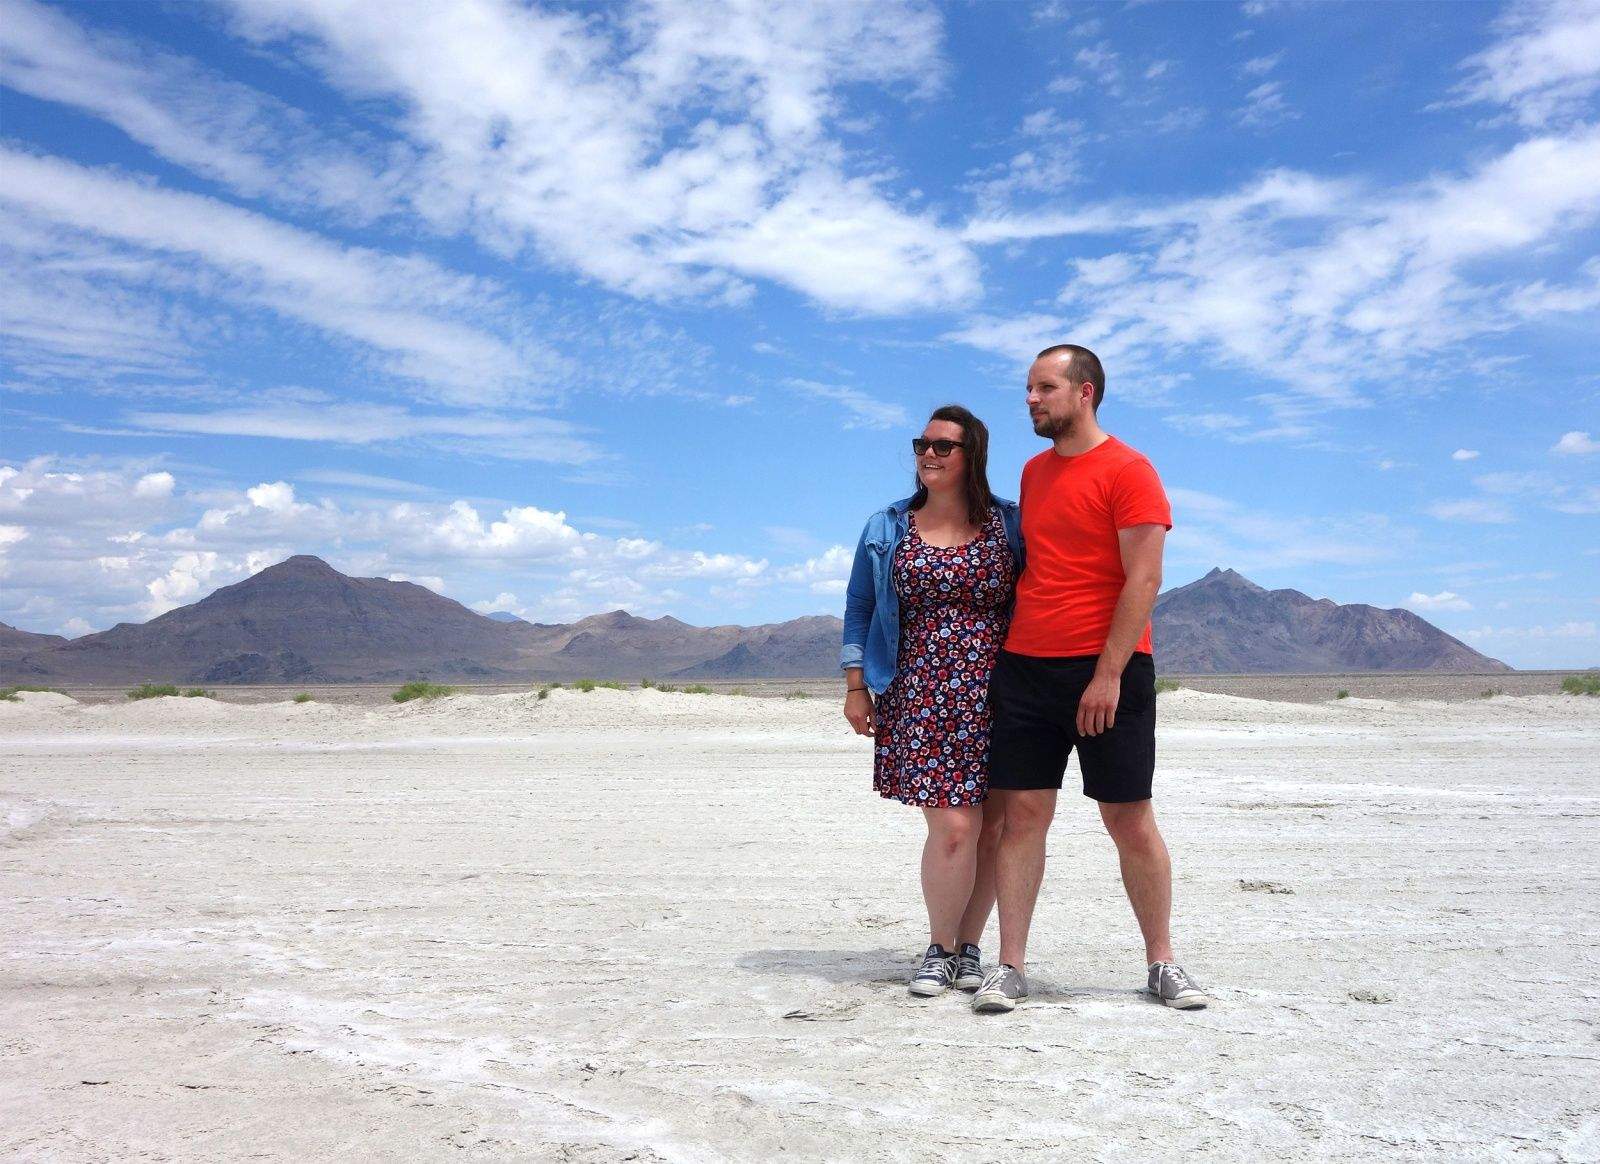 UX designers Holly Kennedy and James Turner run their business from the road as they travel the world. Here, the couple stand in the Bonneville Salt Flats in Utah during an American leg of their travels. Photo courtesy of Kennedy and Turner